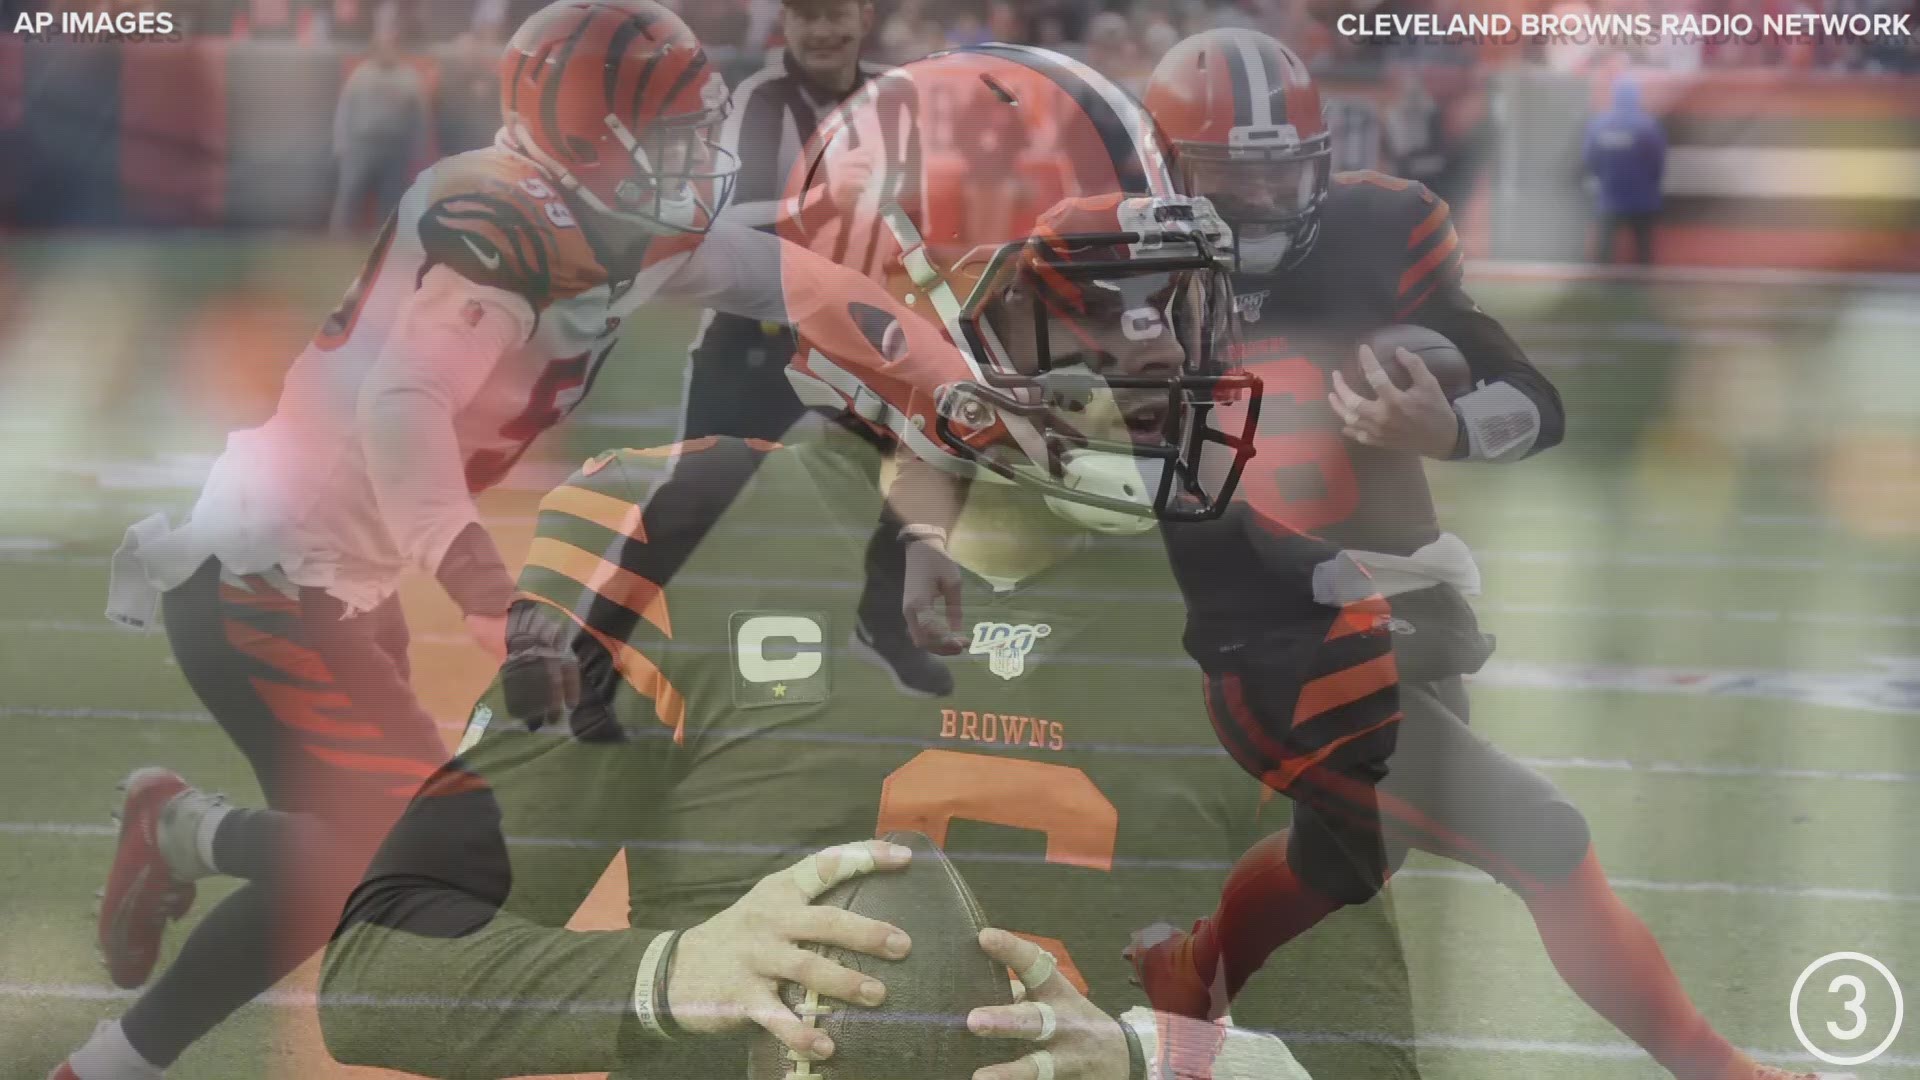 Baker Mayfield gave the Cleveland Browns a 14-13 second quarter lead with a 7-yard touchdown run vs. the Cincinnati Bengals on Sunday.